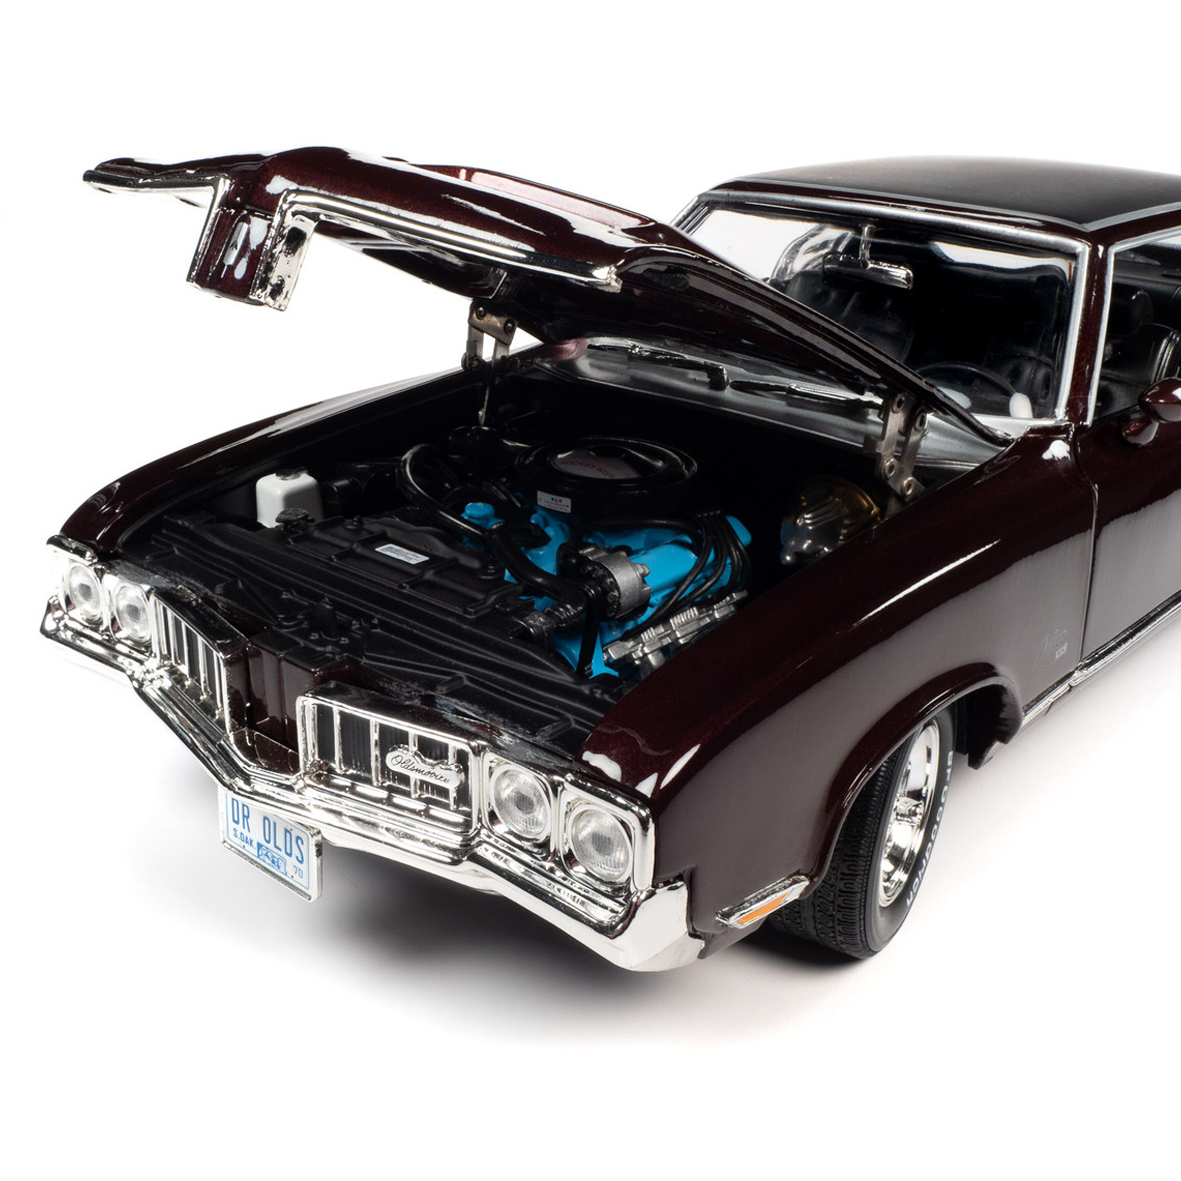 American Muscle,1:18 Scale Oldsmobile Cutlass SX Class of 1970 Auto World American Muscle